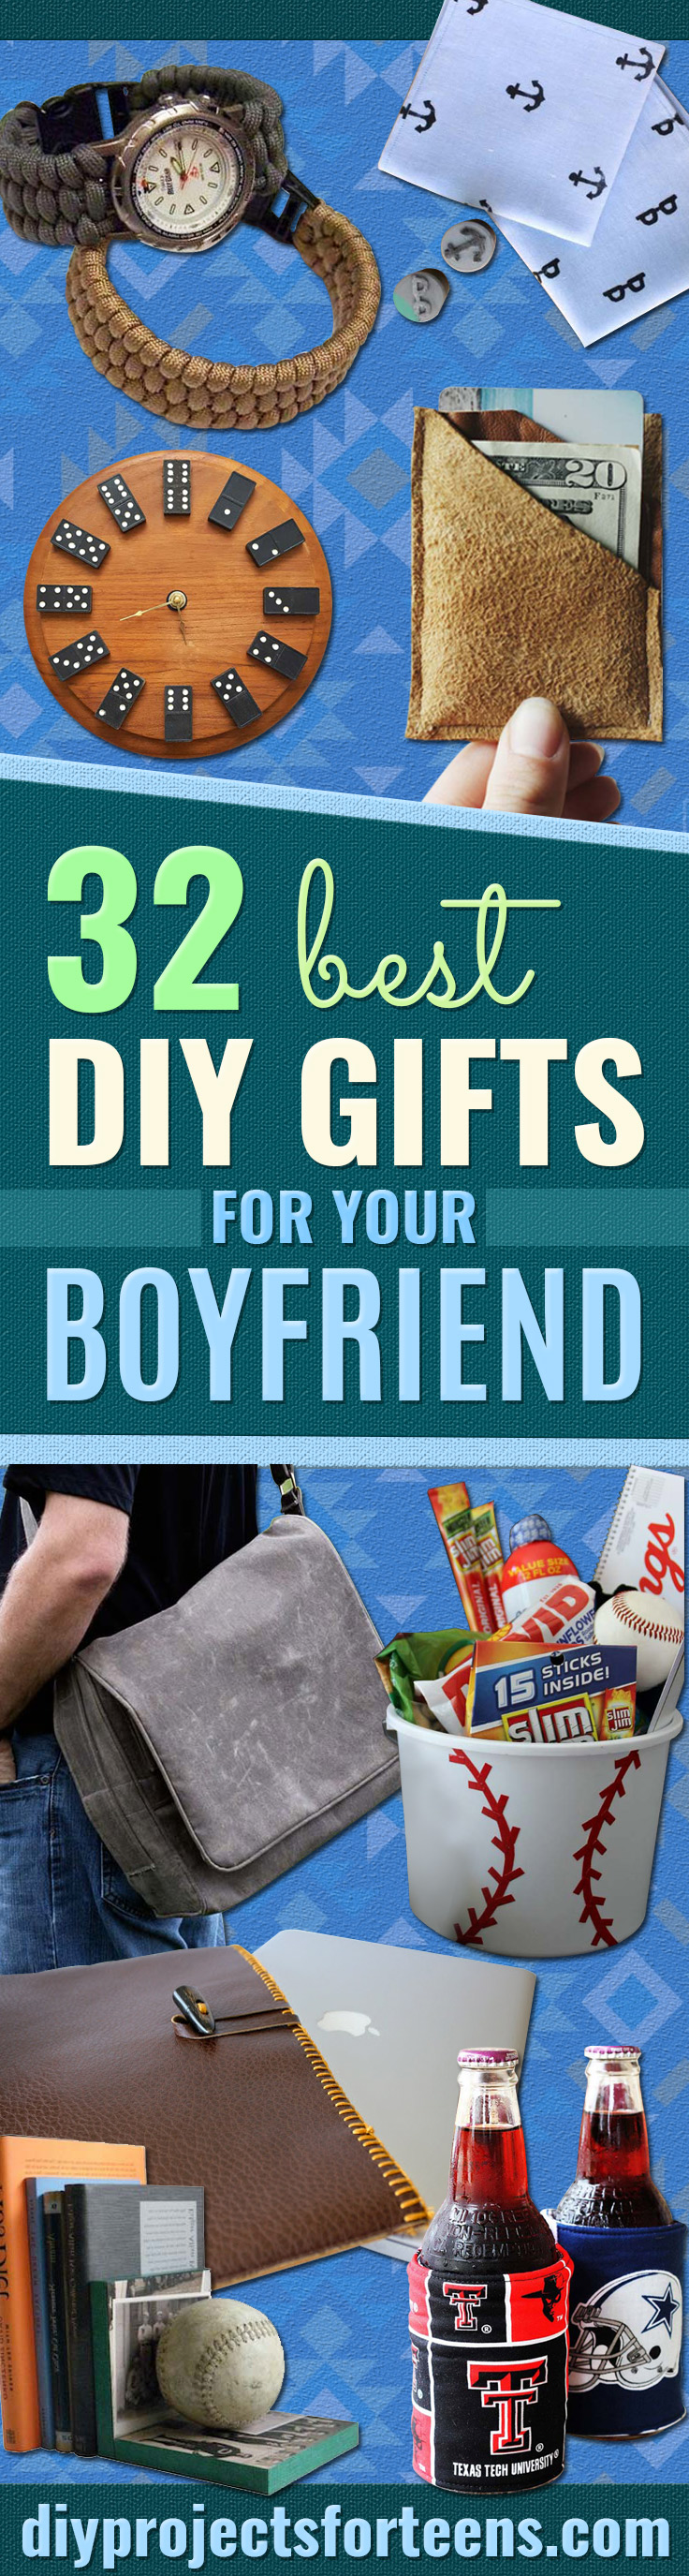 Cool DIY Gifts to Make For Your Boyfriend - Easy, Cheap and Awesome Gift Ideas to Make for Guys - Fun Crafts and Presents to Give to Boyfriends - Men Love These Gift Card Holders, Mason Jar Kits, Thoughtful Handmade Christmas Gifts - DIY Projects for Teens 